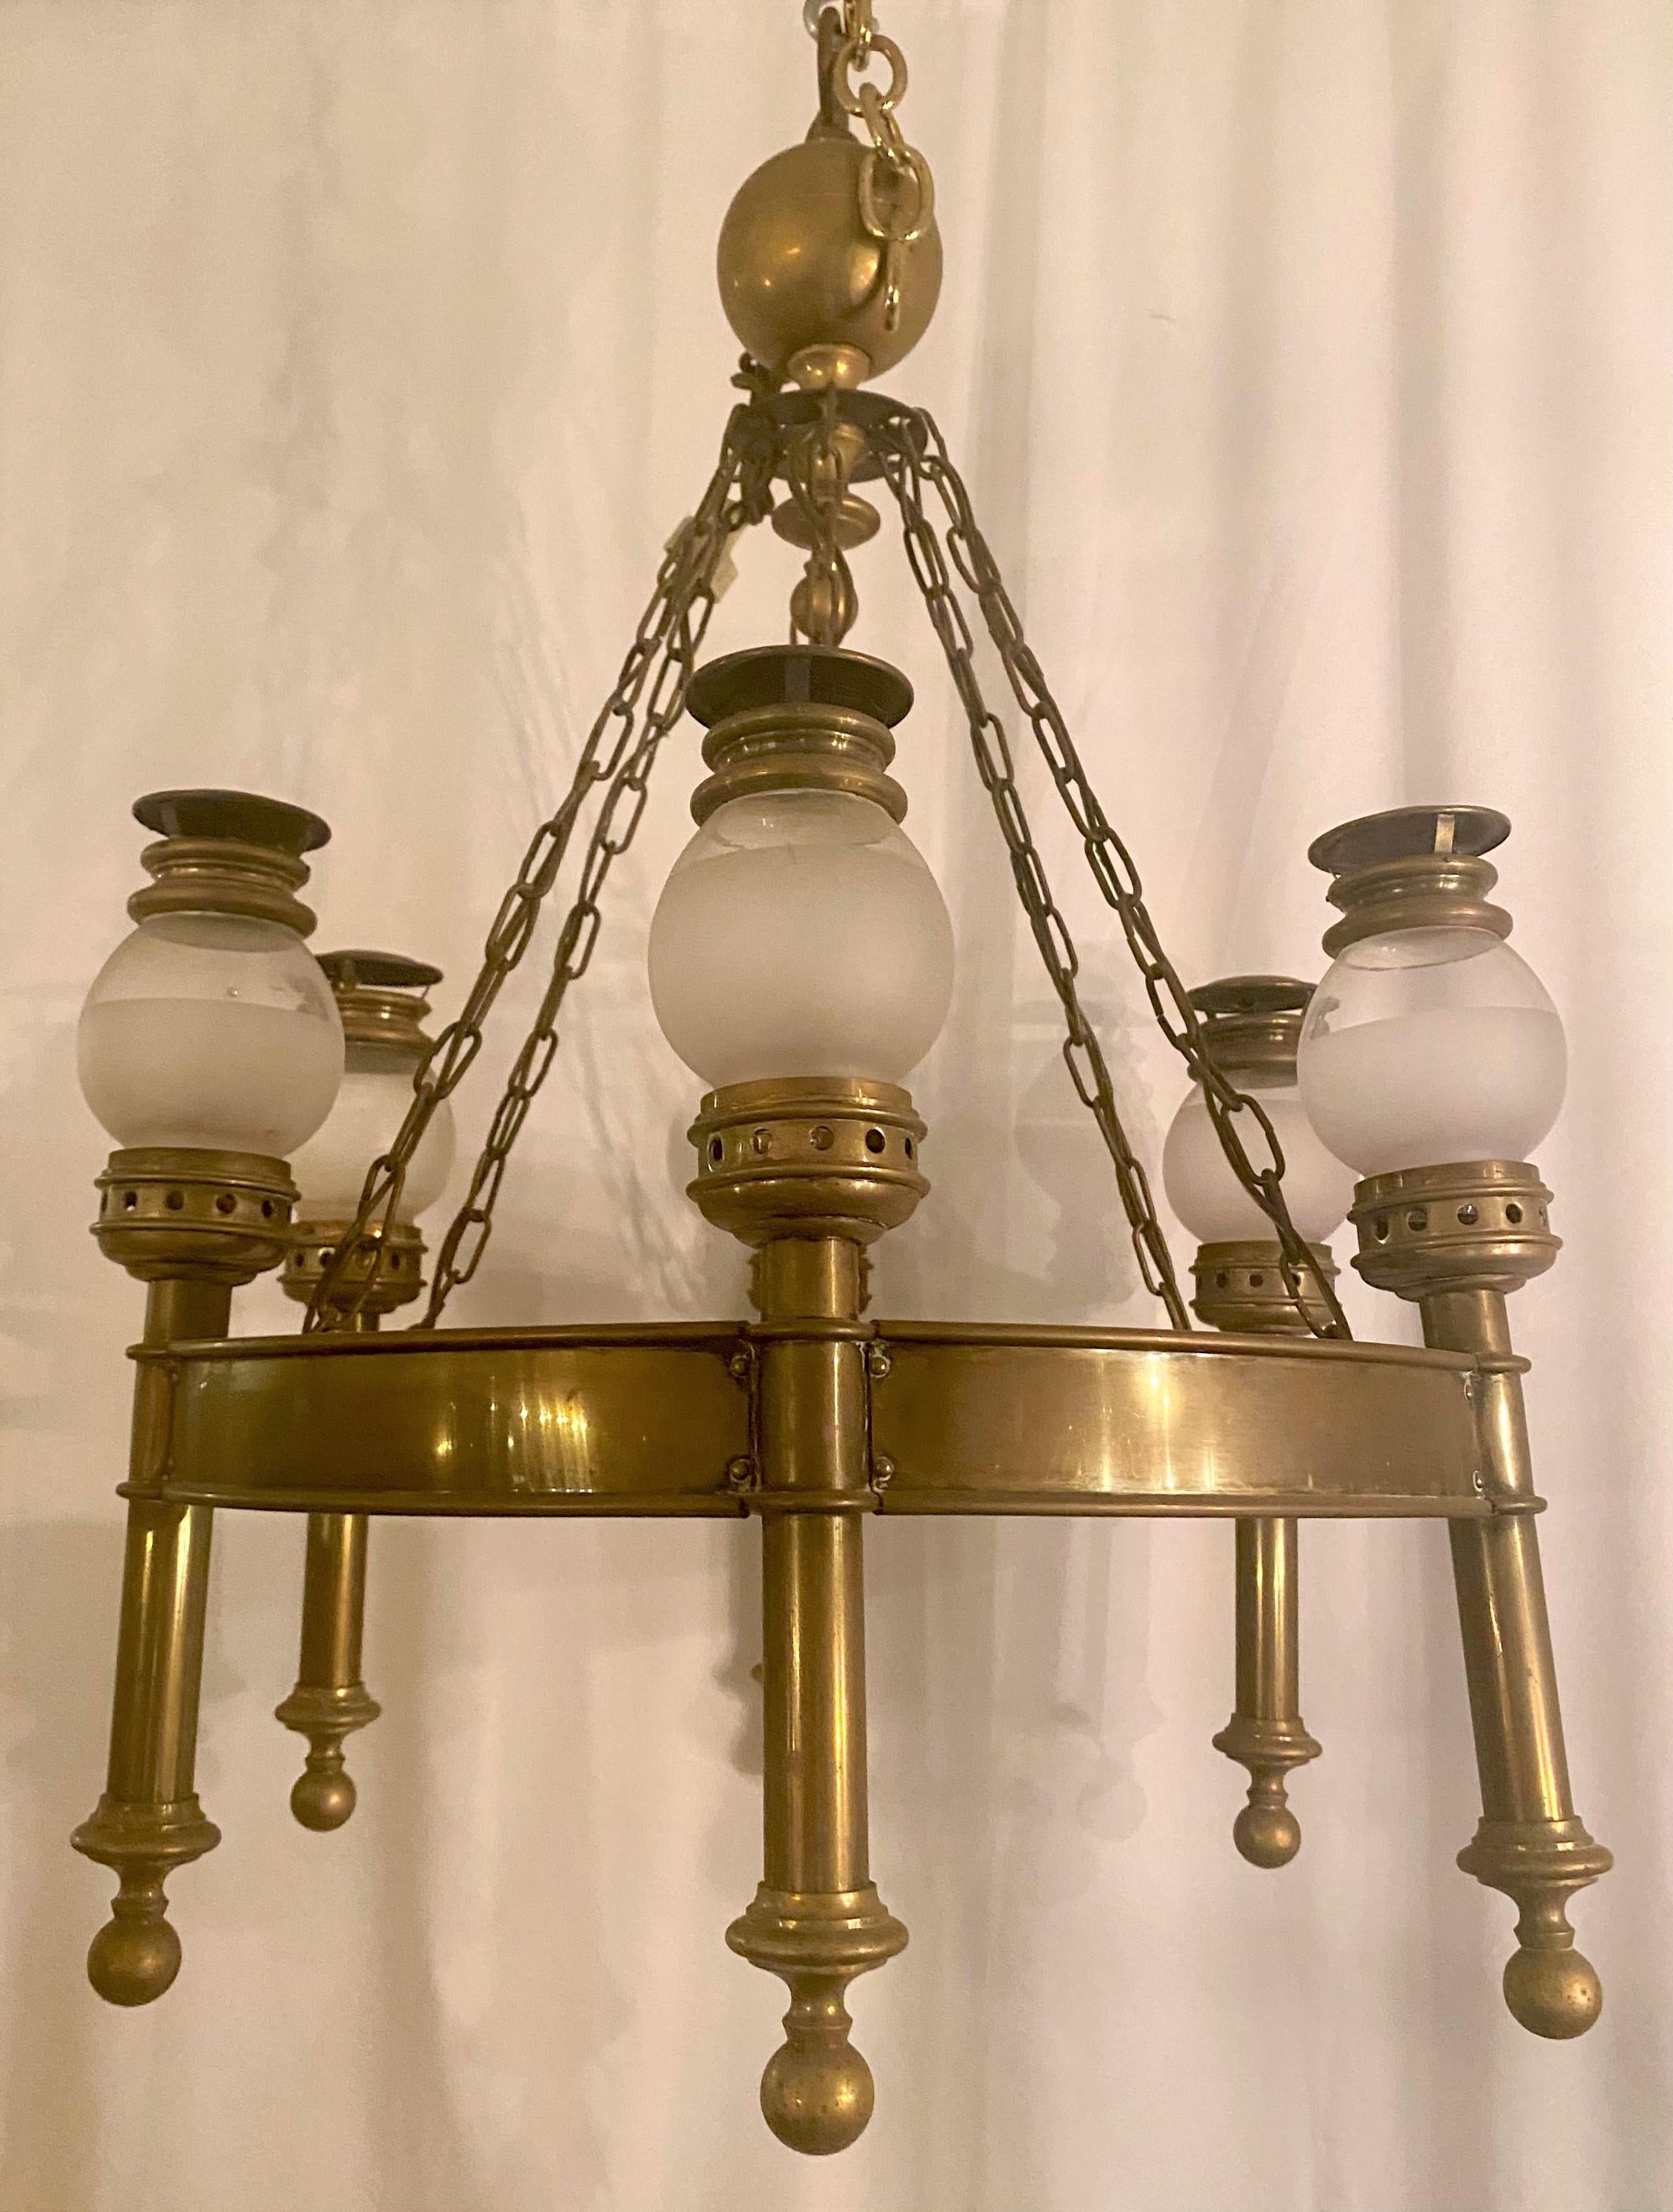 Antique bronze chandelier from David Adler Home in Lake Forest Illinois, Circa 1920-1930.
From the estate of Albert Lasker - Mill Road Farm, Lake Forest, IL
David Adler, renowned architect
Frances Elkins, decorator
CHB004.